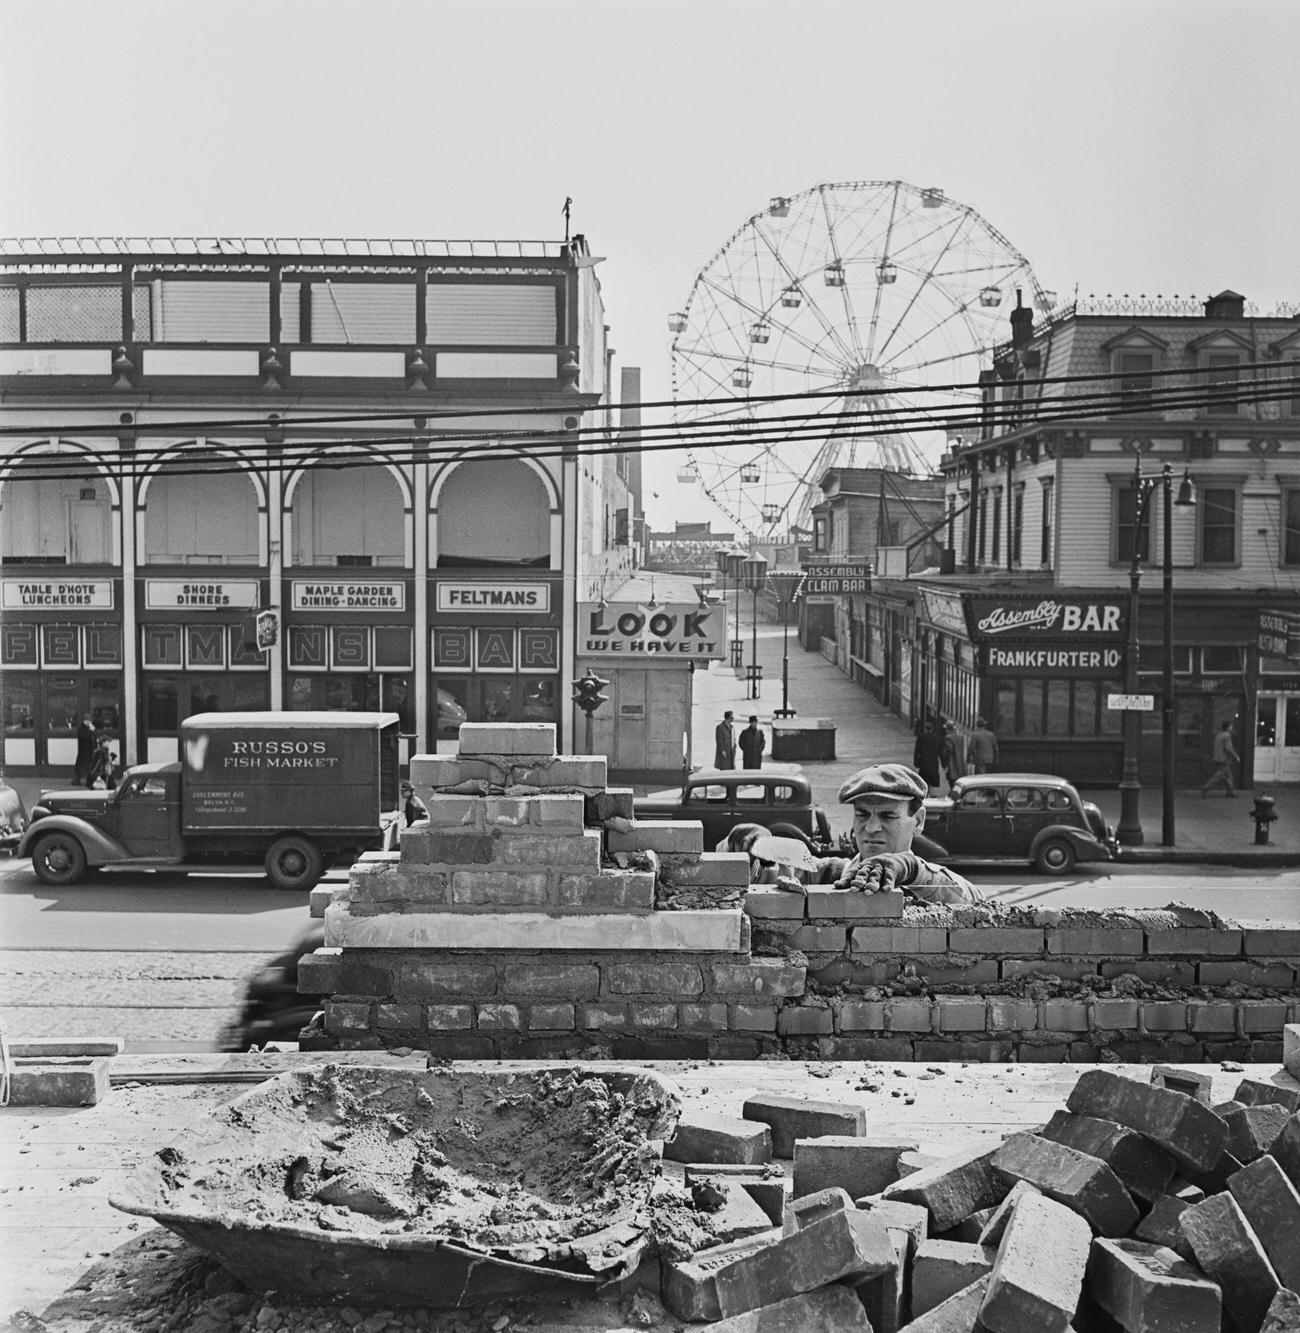 Bricklayer Working, With Wonder Wheel In The Background At Coney Island, Brooklyn, 1950.